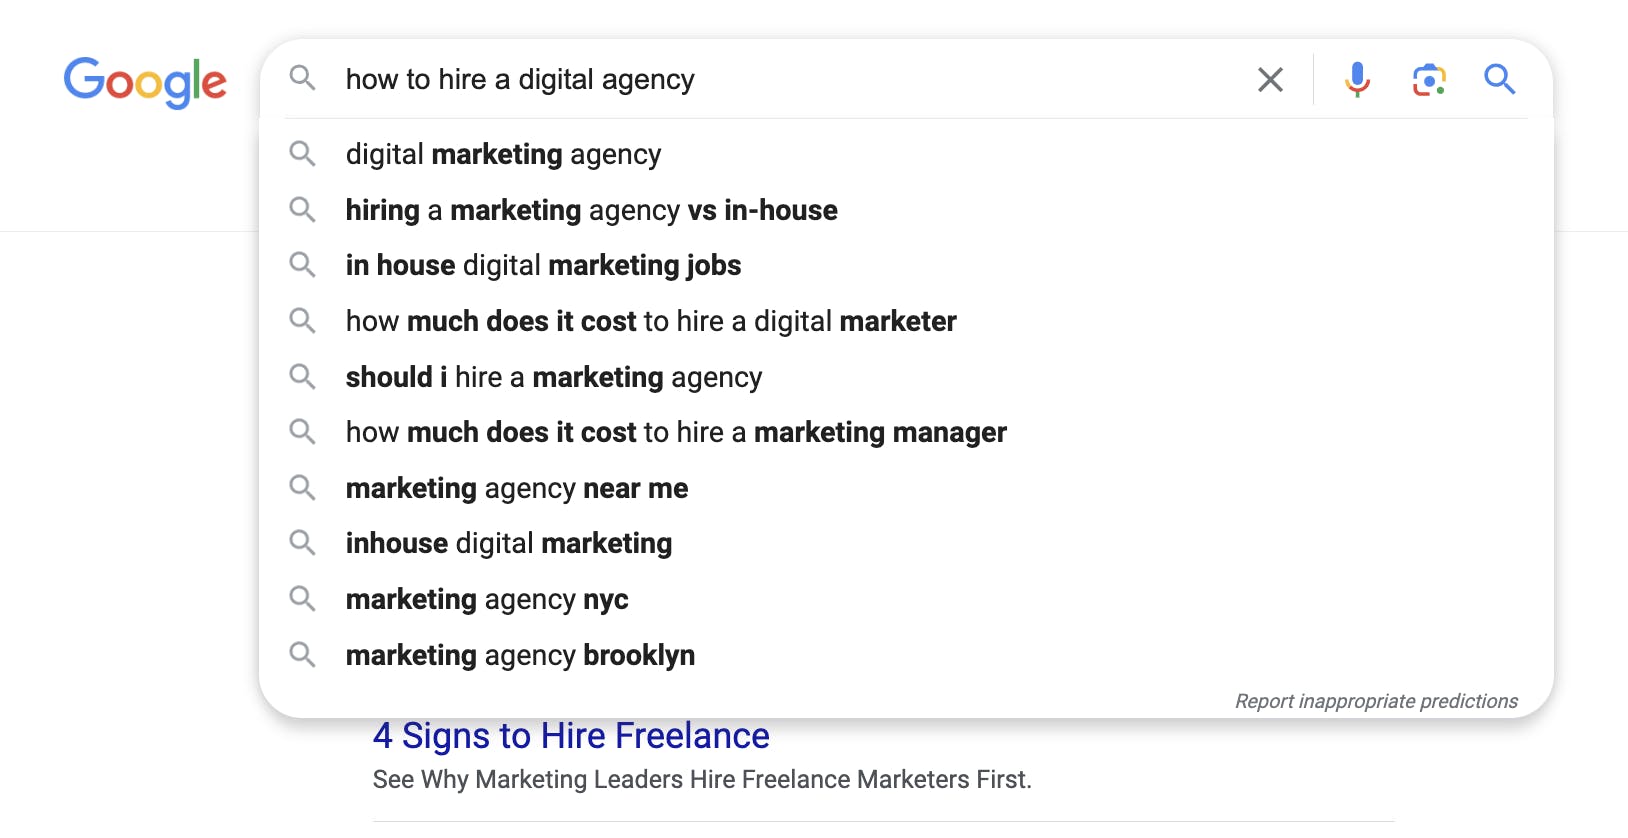 Google's suggested queries for a search about "how to hire a digital agency"